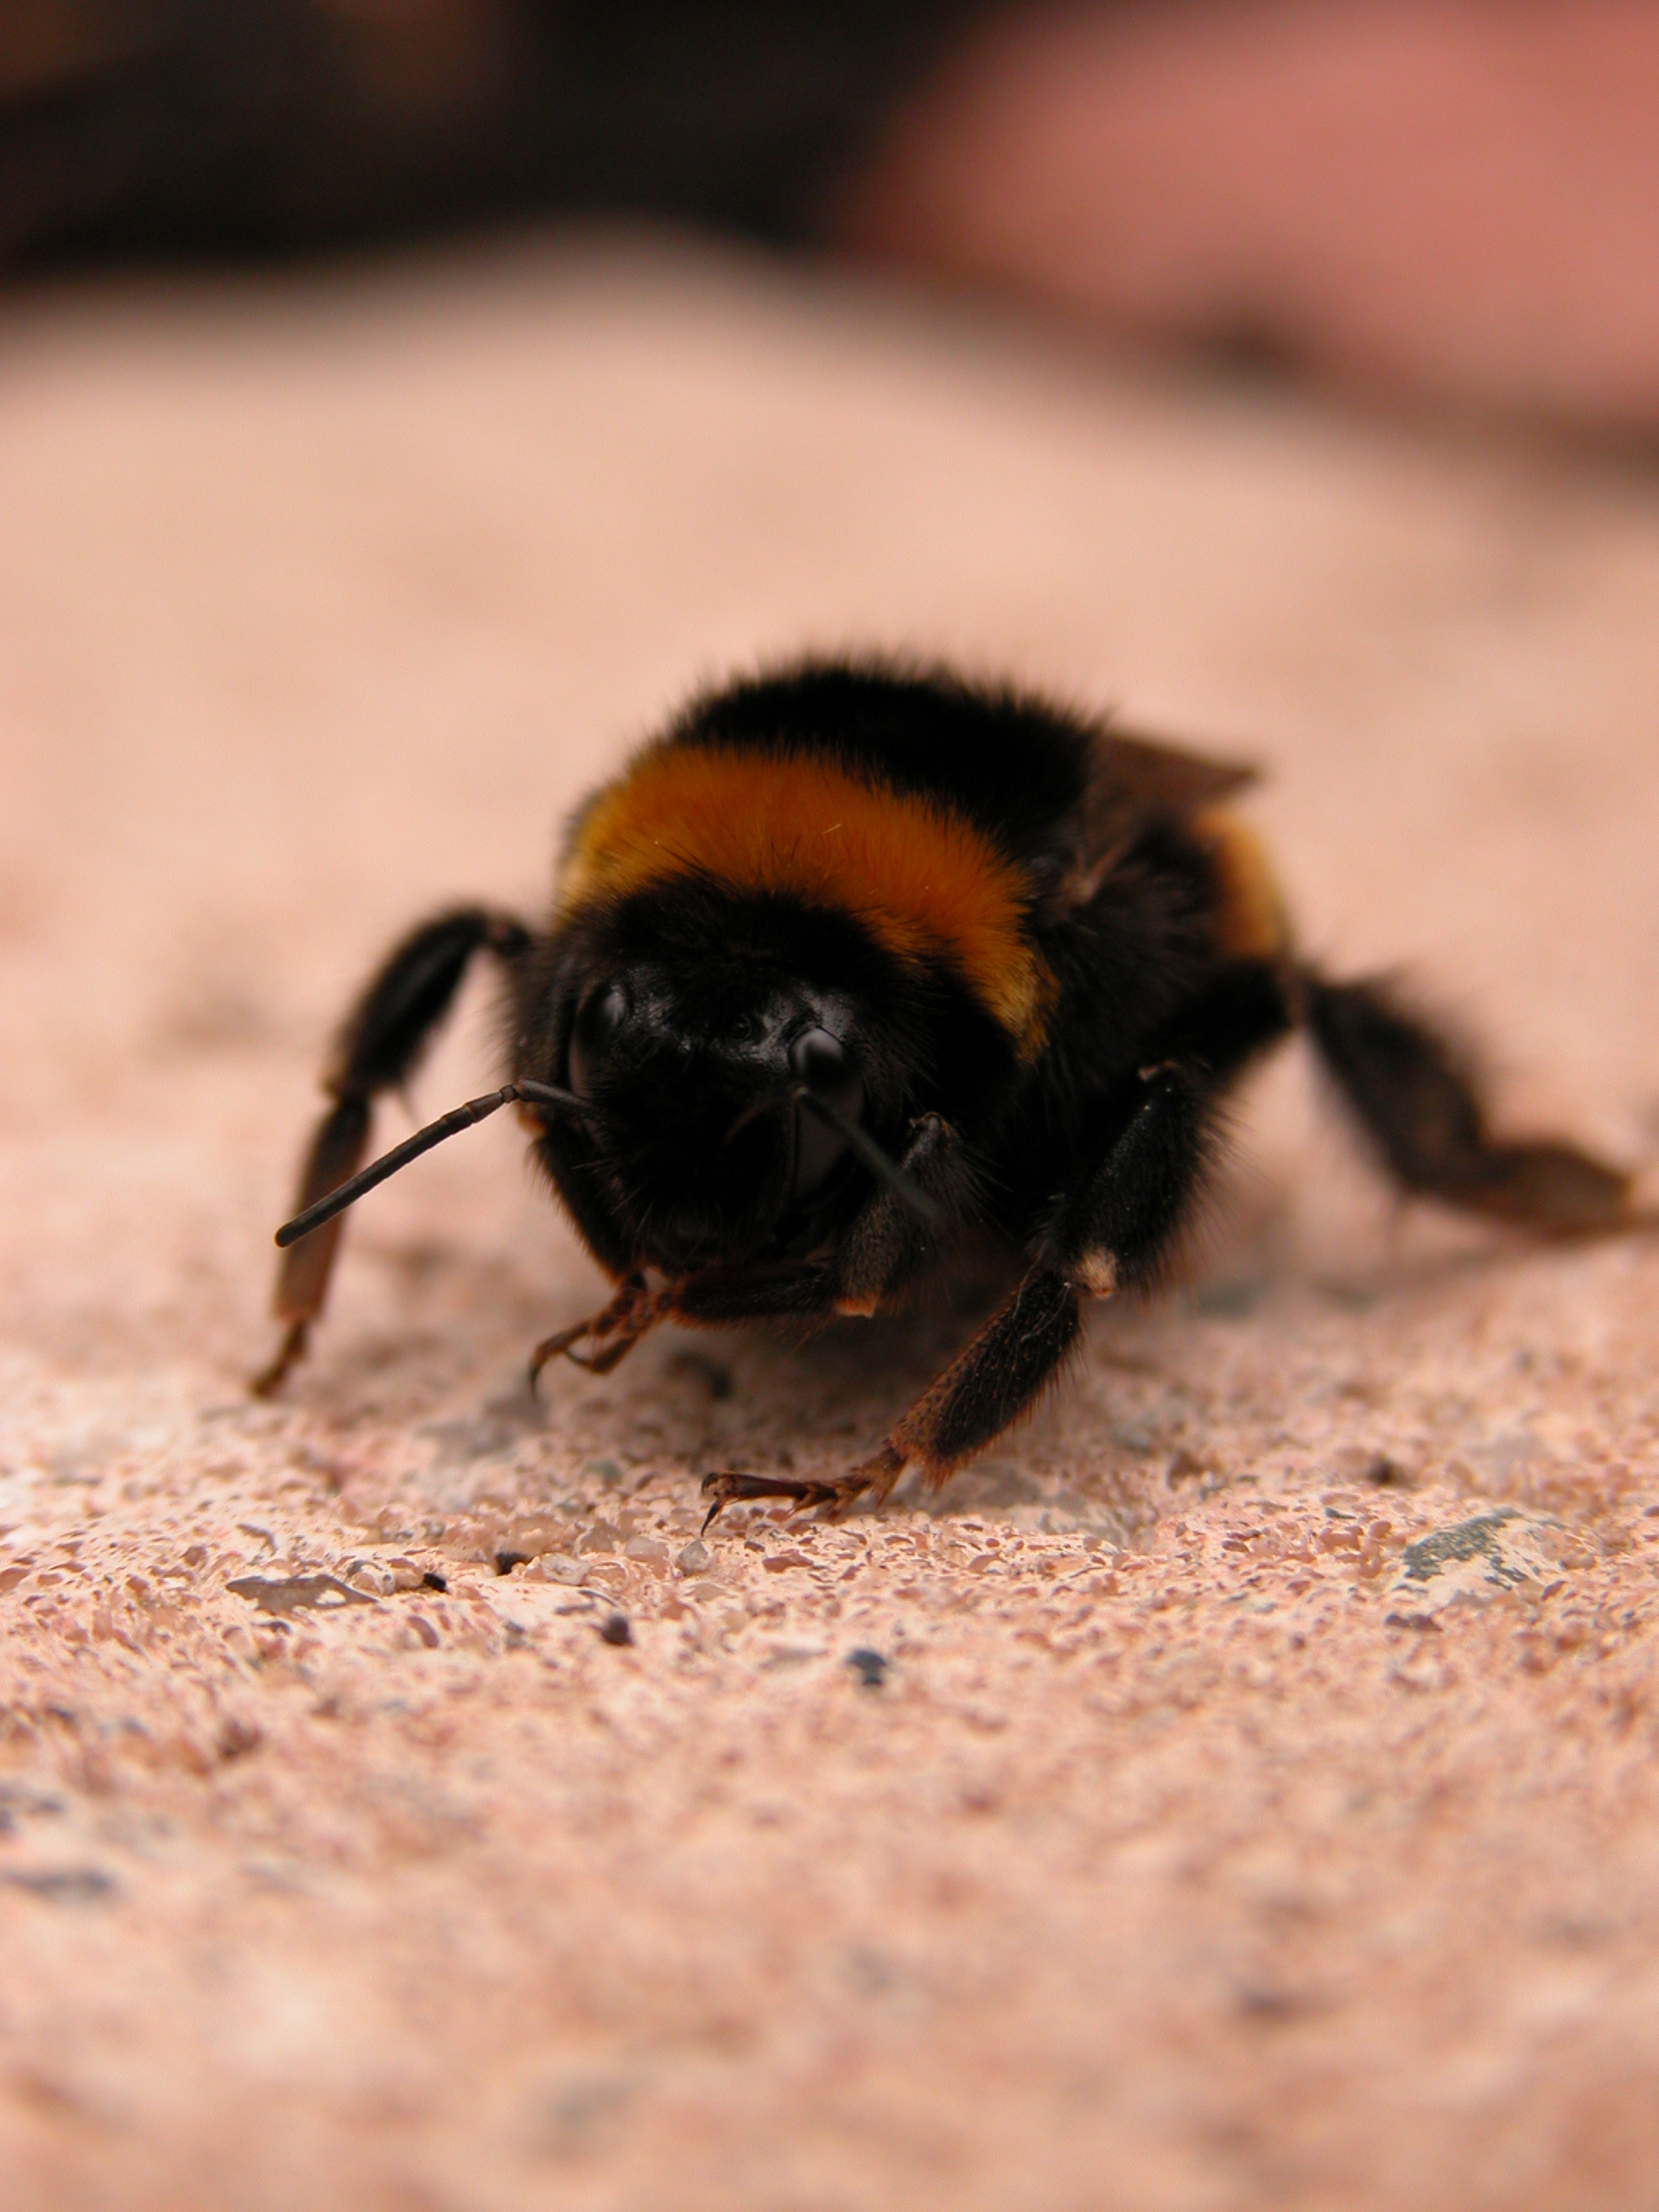 bumble bee on ground fur hairy soft searching for his contacts